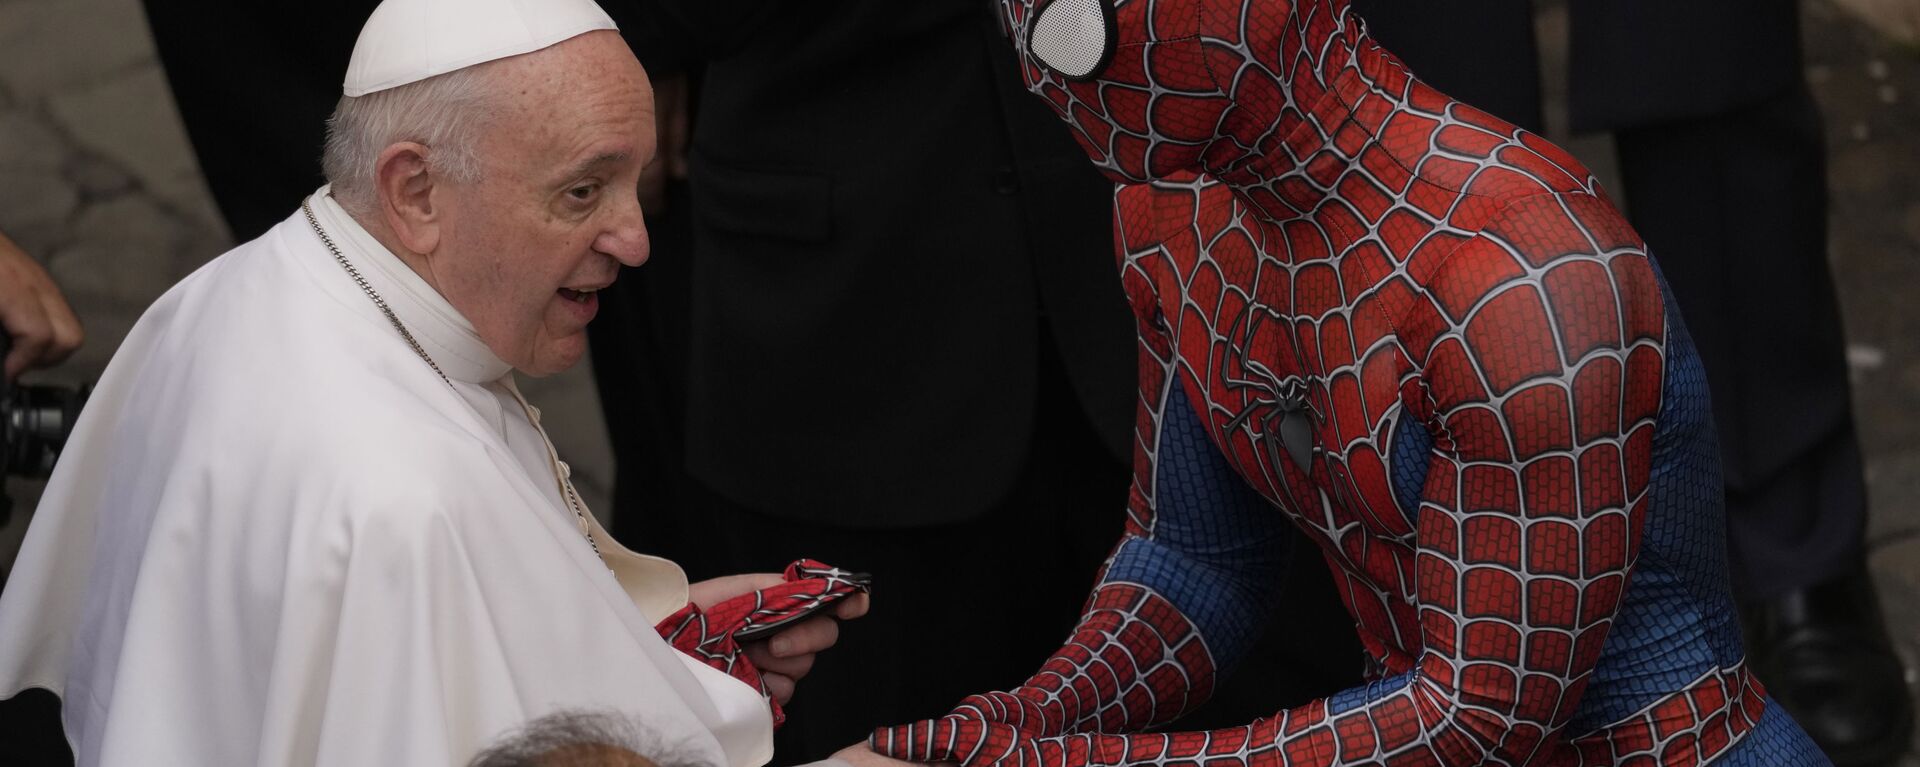 Pope Francis meets Spider-Man, who presents him with his mask, at the end of his weekly general audience with a limited number of faithful in the San Damaso Courtyard at the Vatican, Wednesday, June 23, 2021. The masked man works with sick children in hospitals. - Sputnik International, 1920, 23.06.2021